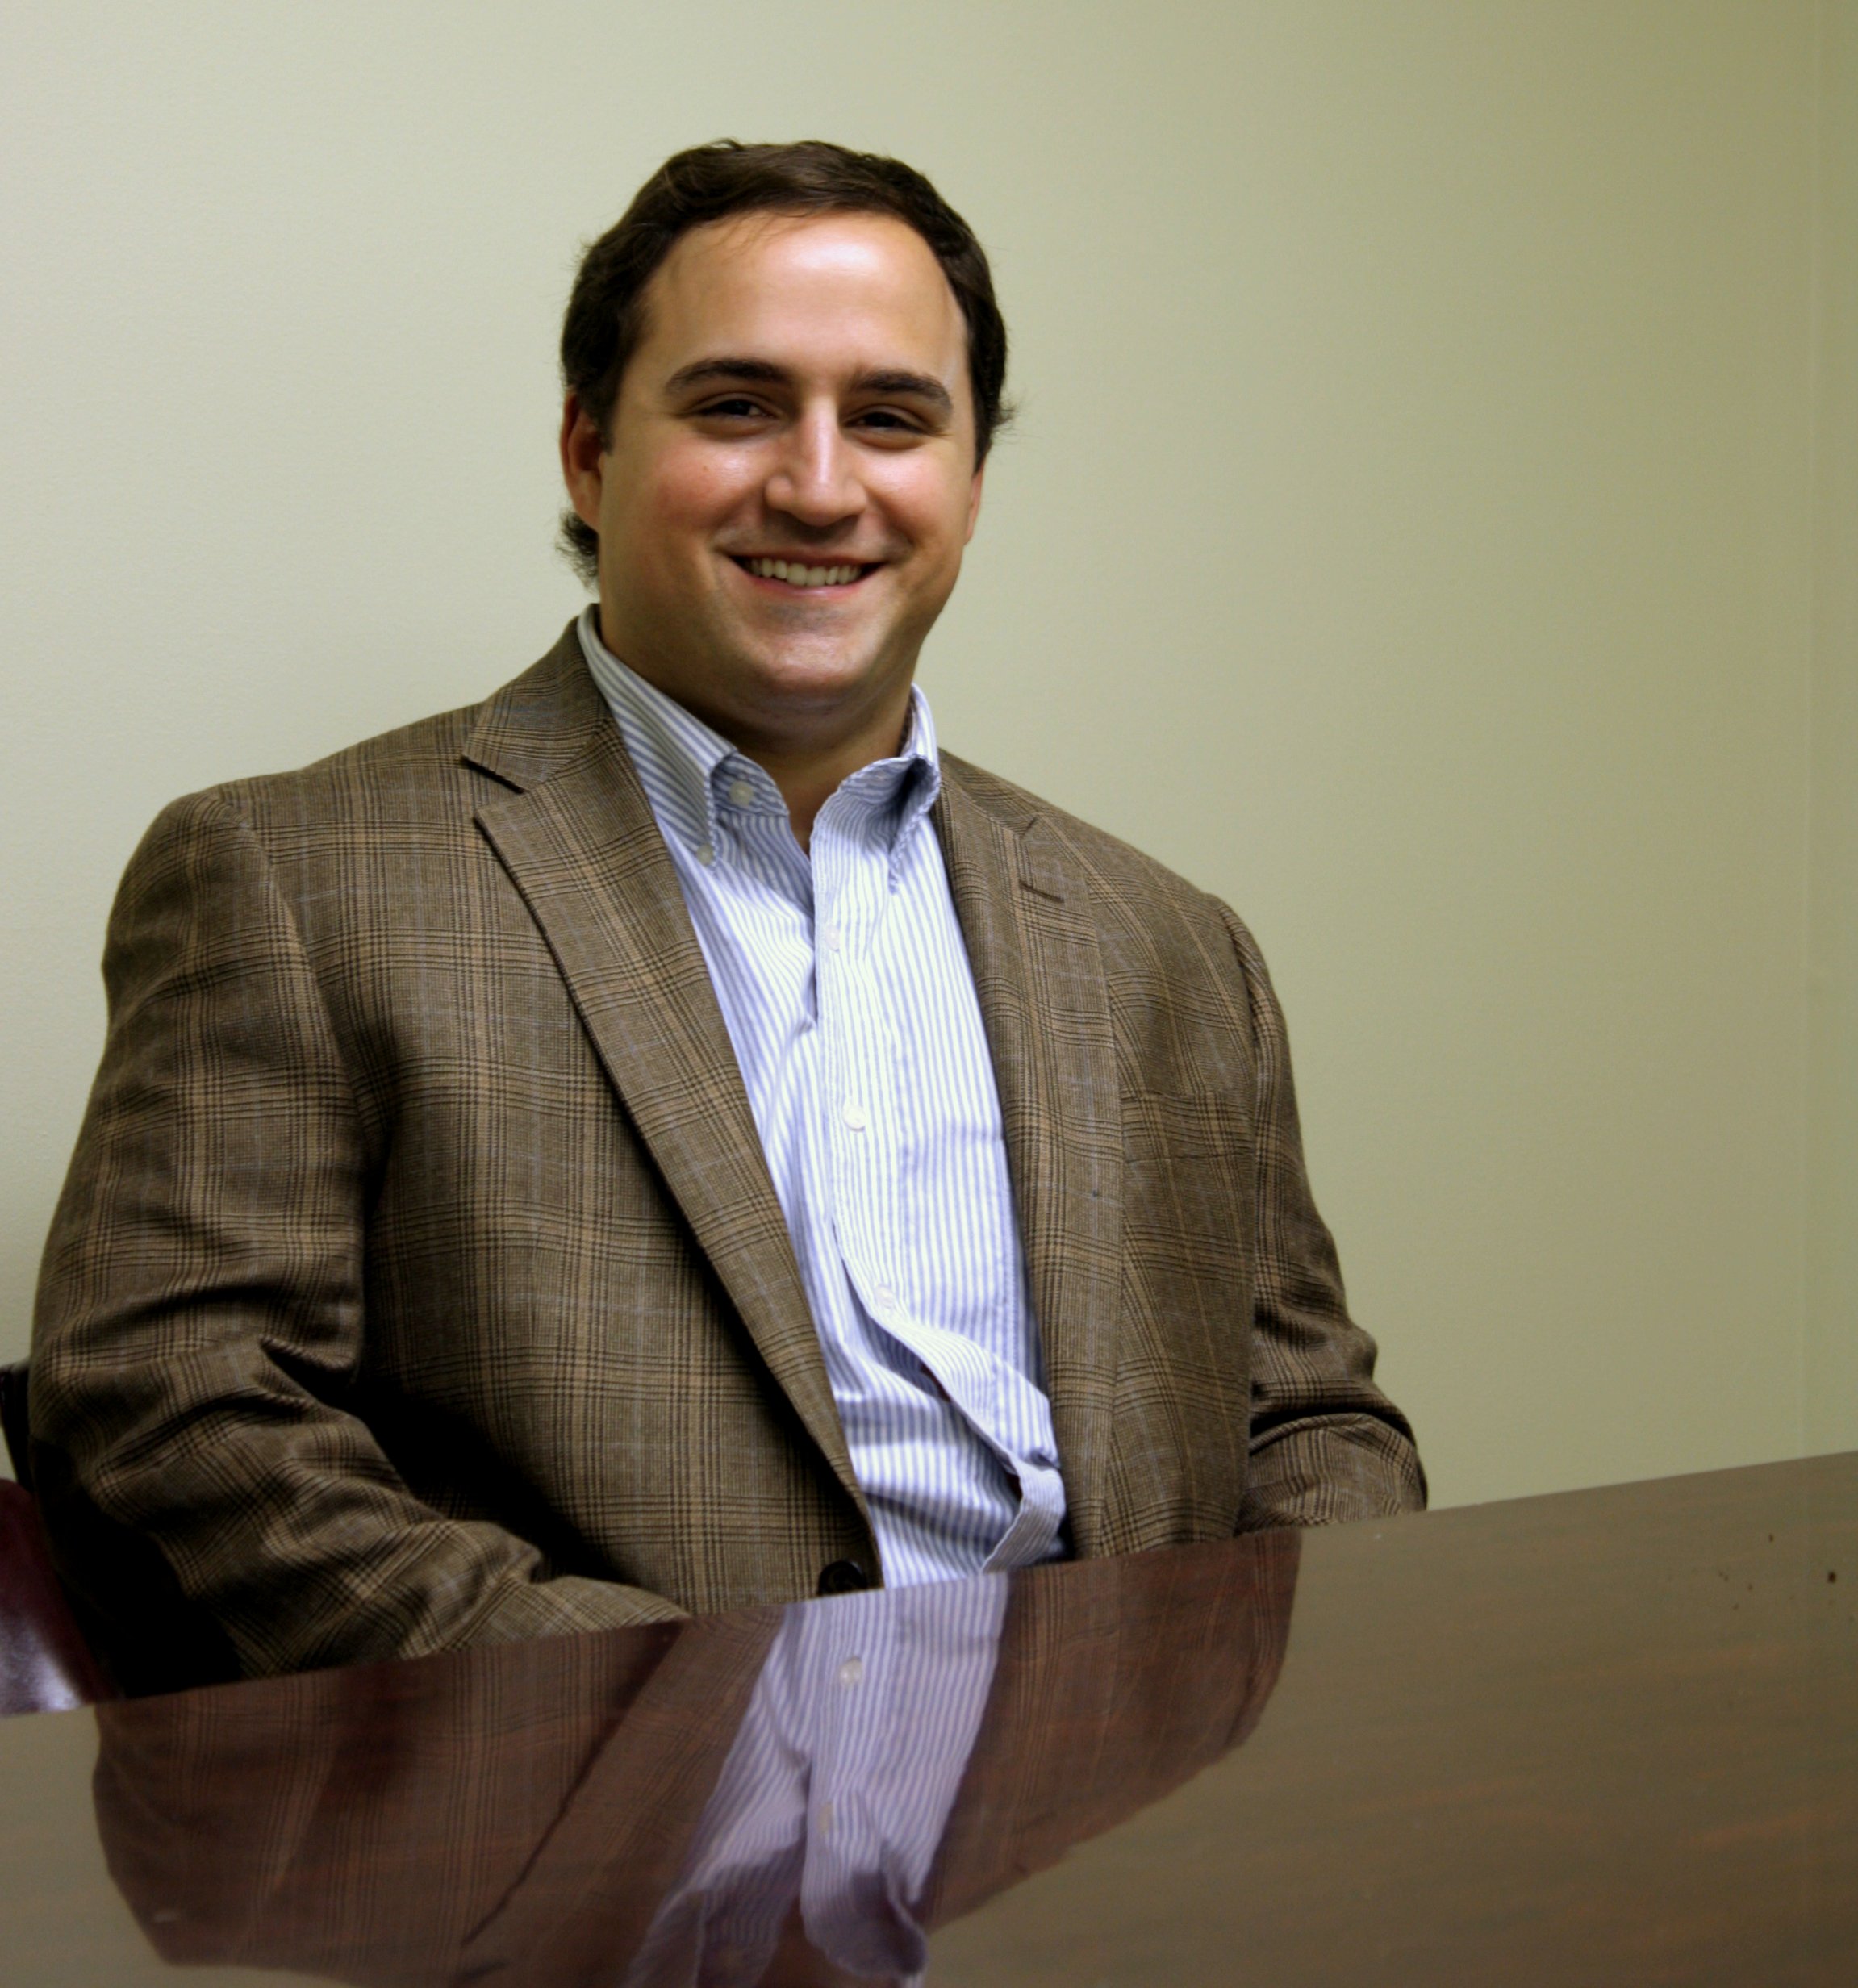 Adam Maniscalco, an attorney at law with and founding partner of Baxley Maniscalco, sits at a desk and poses for a photo.